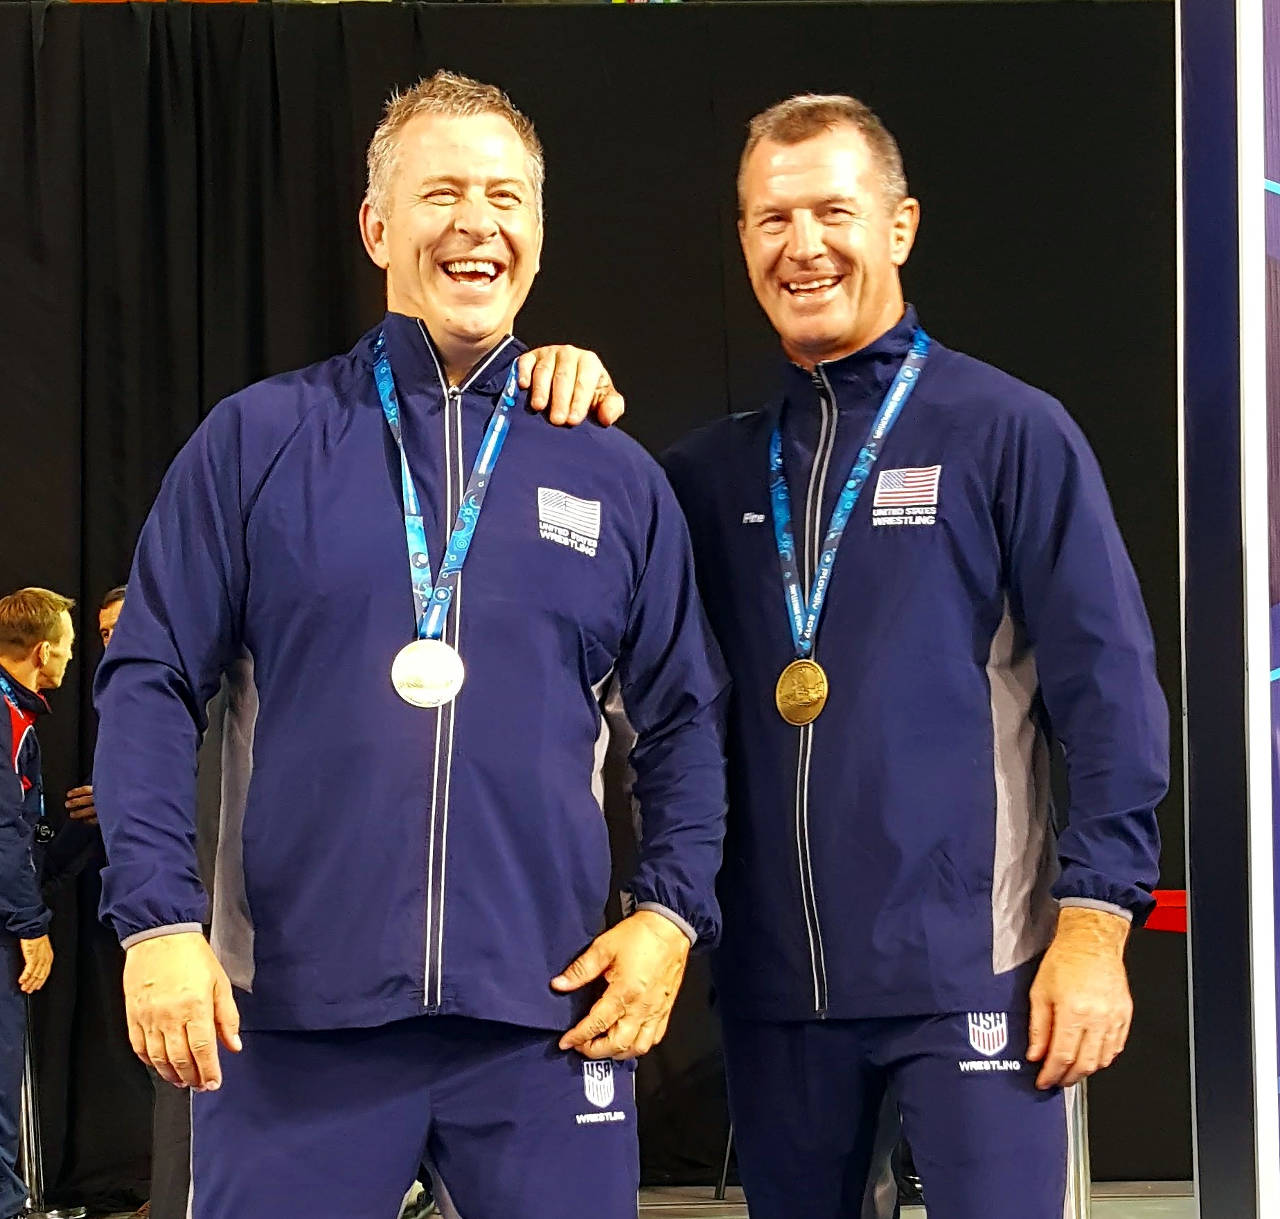 Kevin Pine, left, stands with his brother, Phillip Pine, after winning bronze medals at the Veteran World wrestling tournament in Plovdiv, Bulgaria. Kevin Pine was named Grays Harbor College head women’s wrestling coach in early May. (Submitted photo)